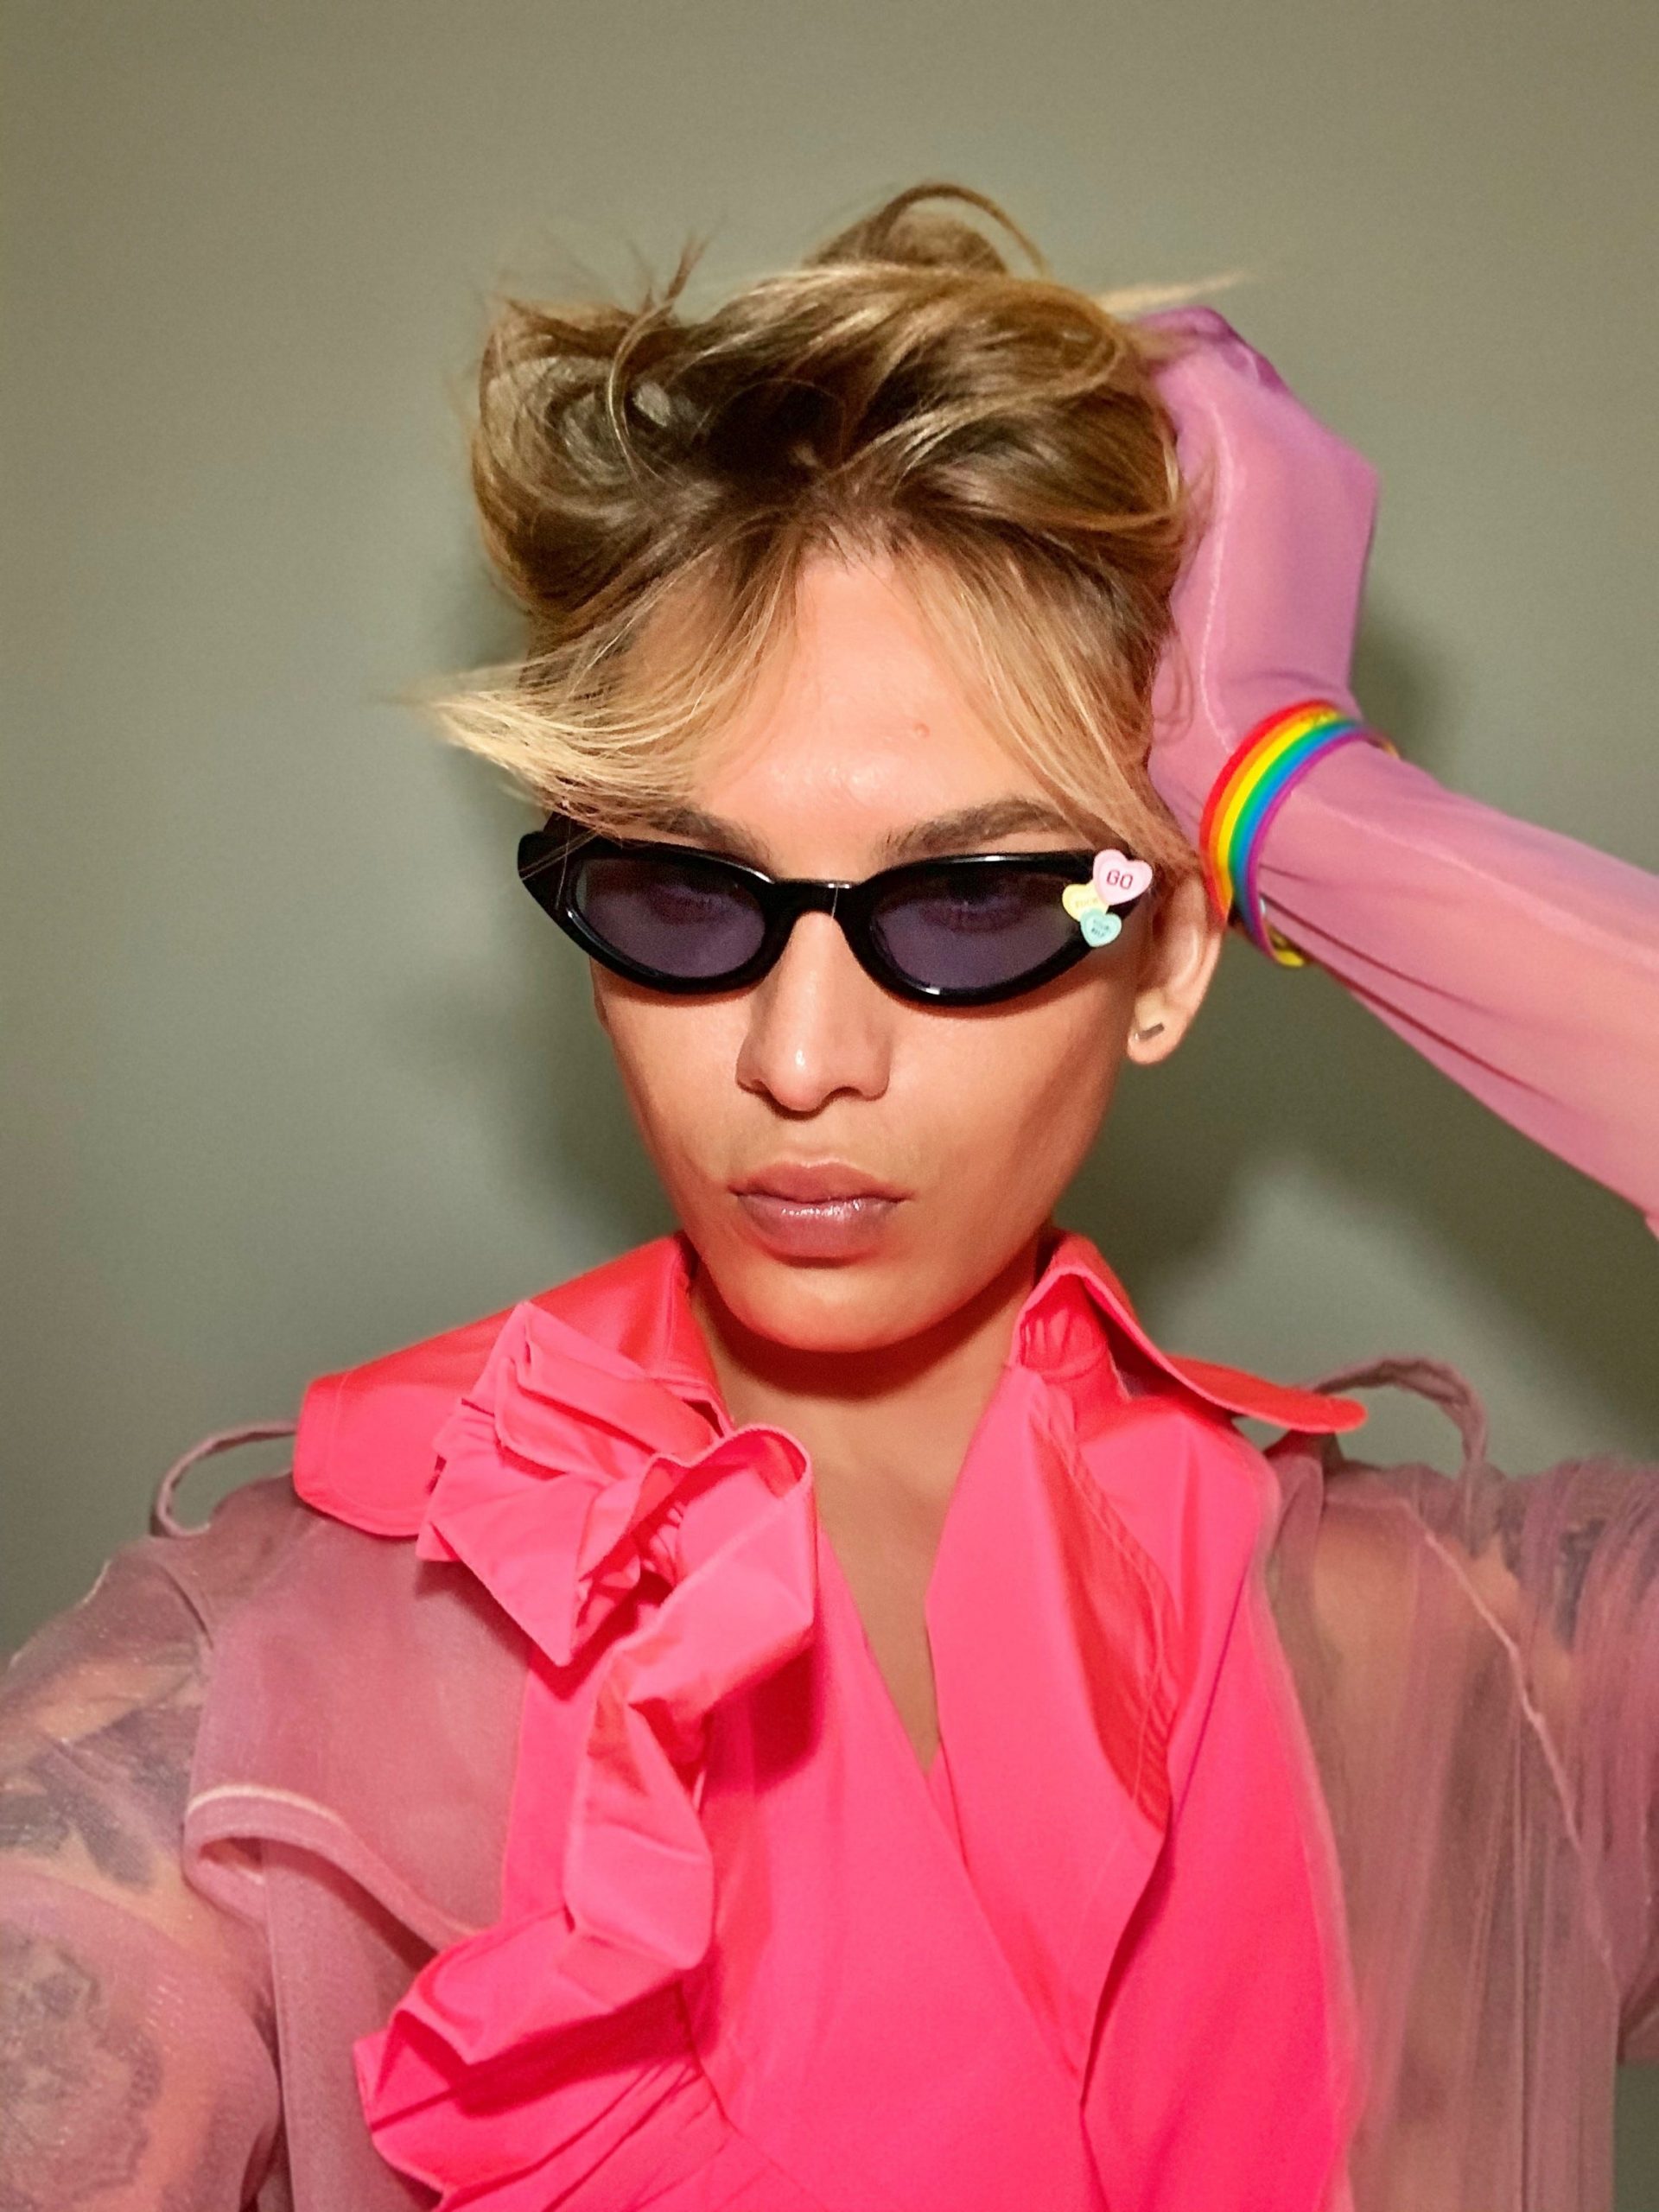 Miss Fame poses in sunglasses and a pink outfit